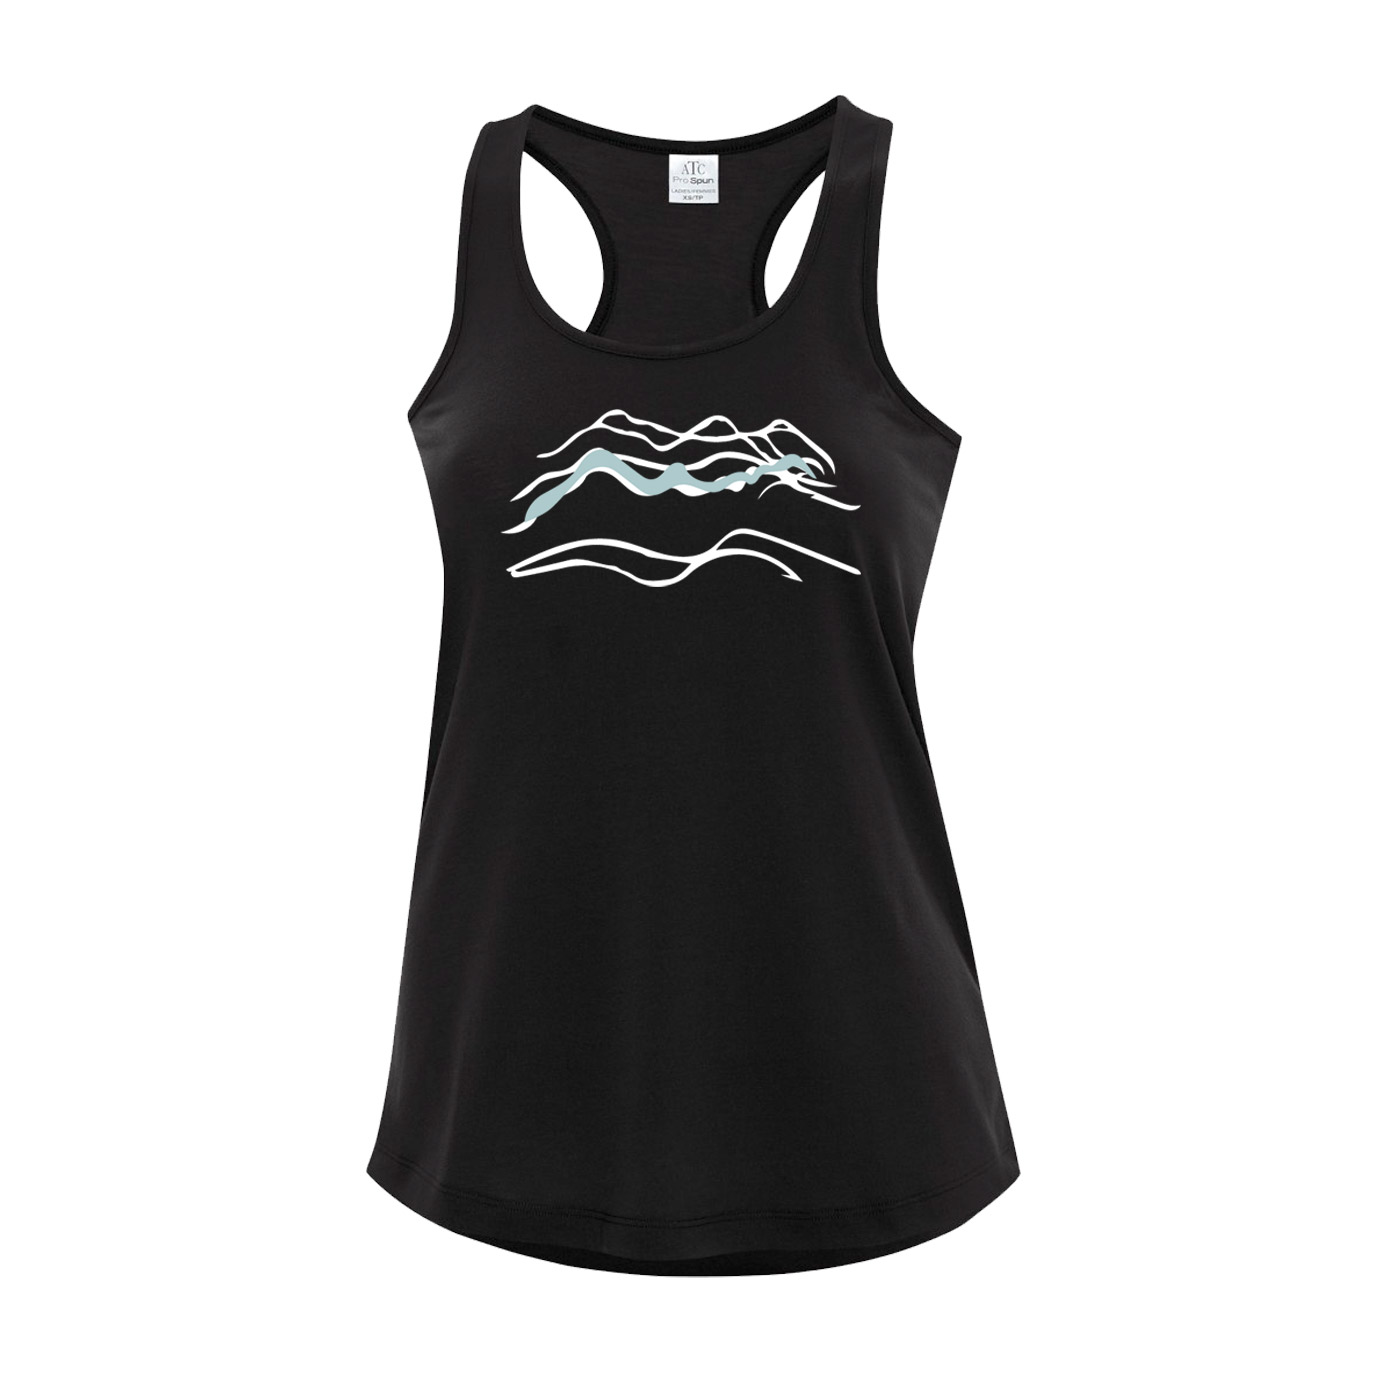 Country Road Womens Size XL Tank Black (s)